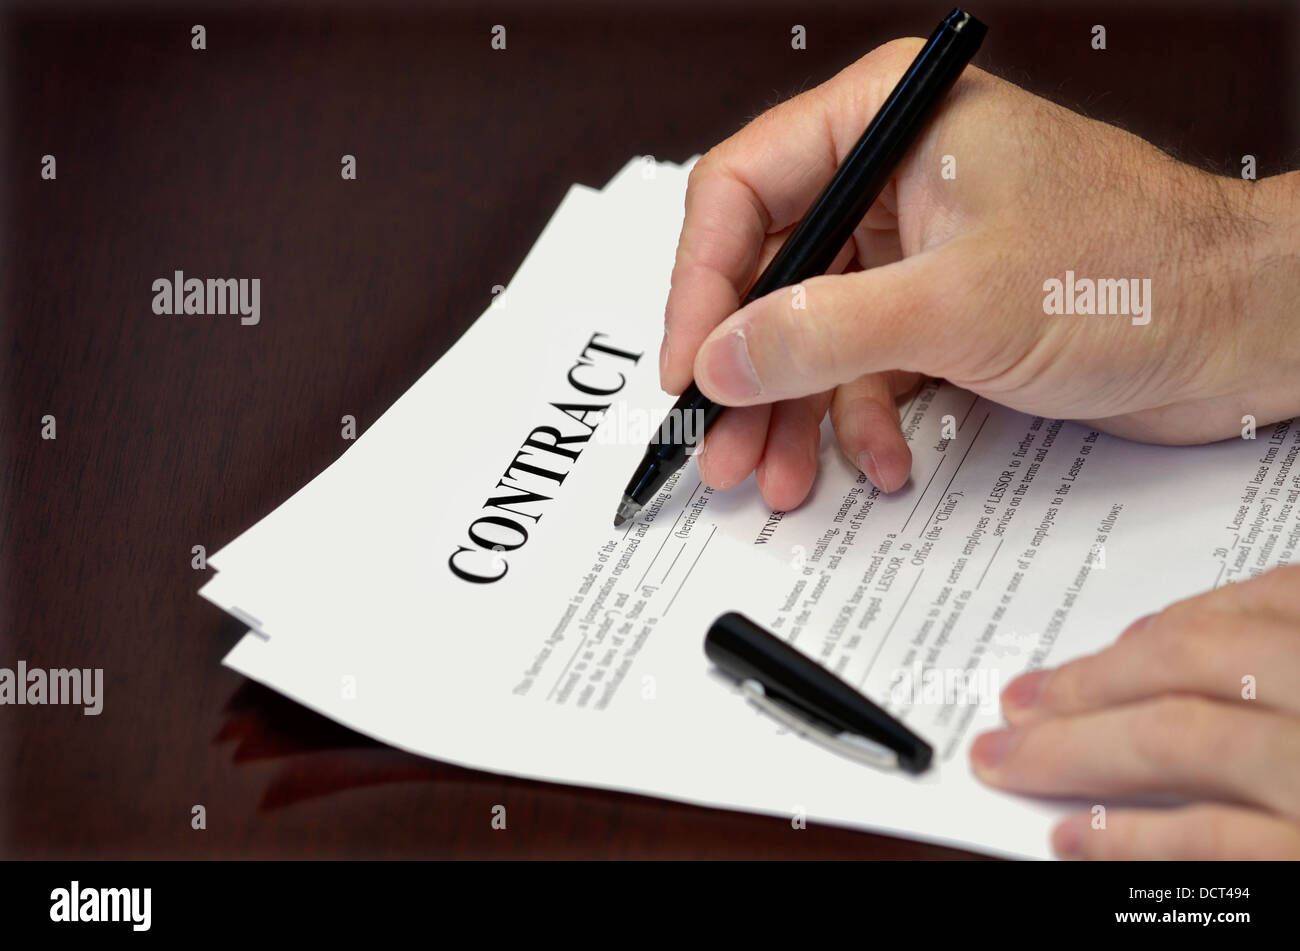 Business man signing contract with black pen on desk Stock Photo